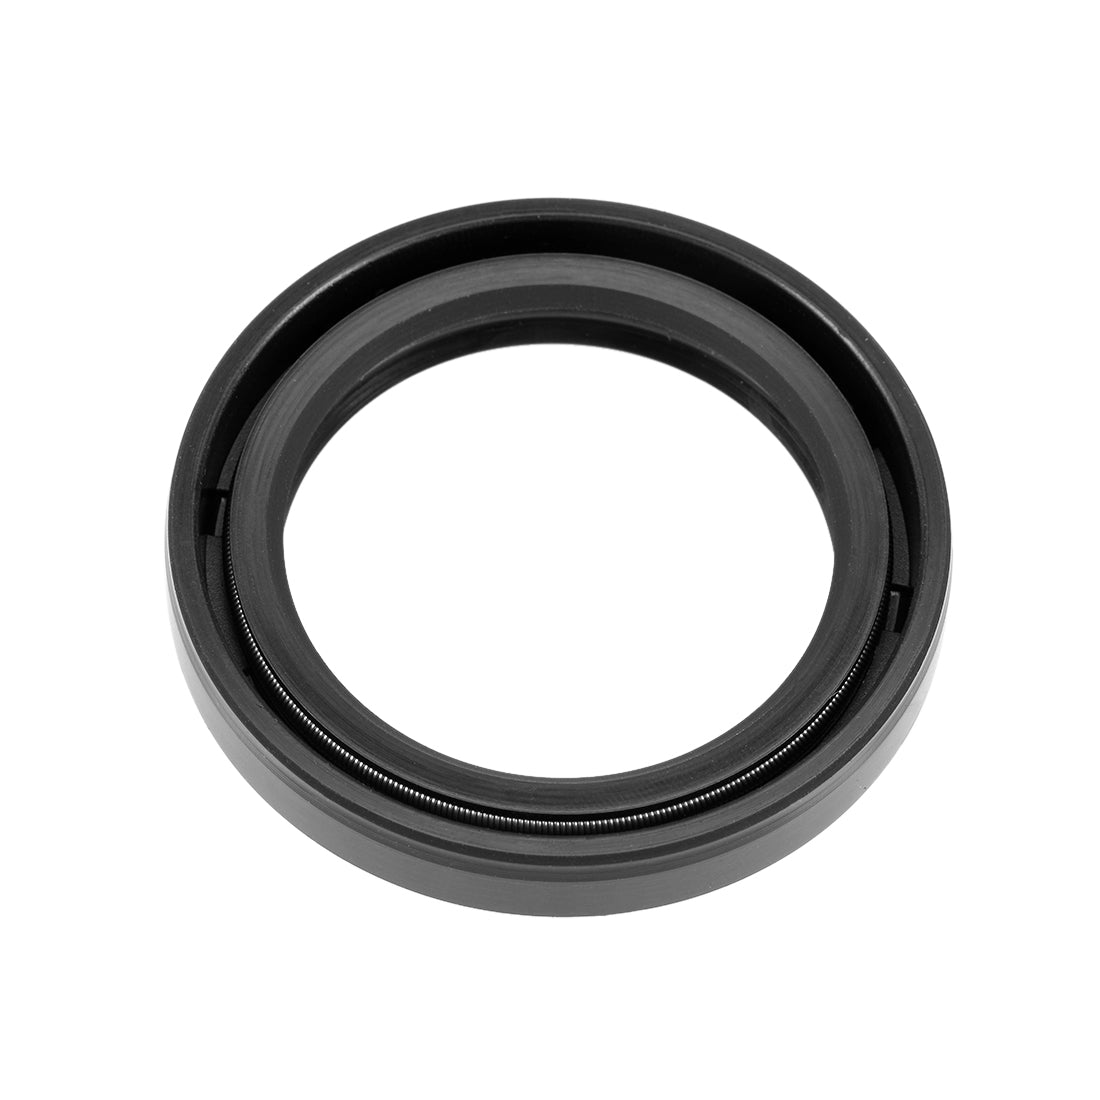 Uxcell Uxcell Oil Seal, TC 36mm x 50mm x 7mm, Nitrile Rubber Cover Double Lip